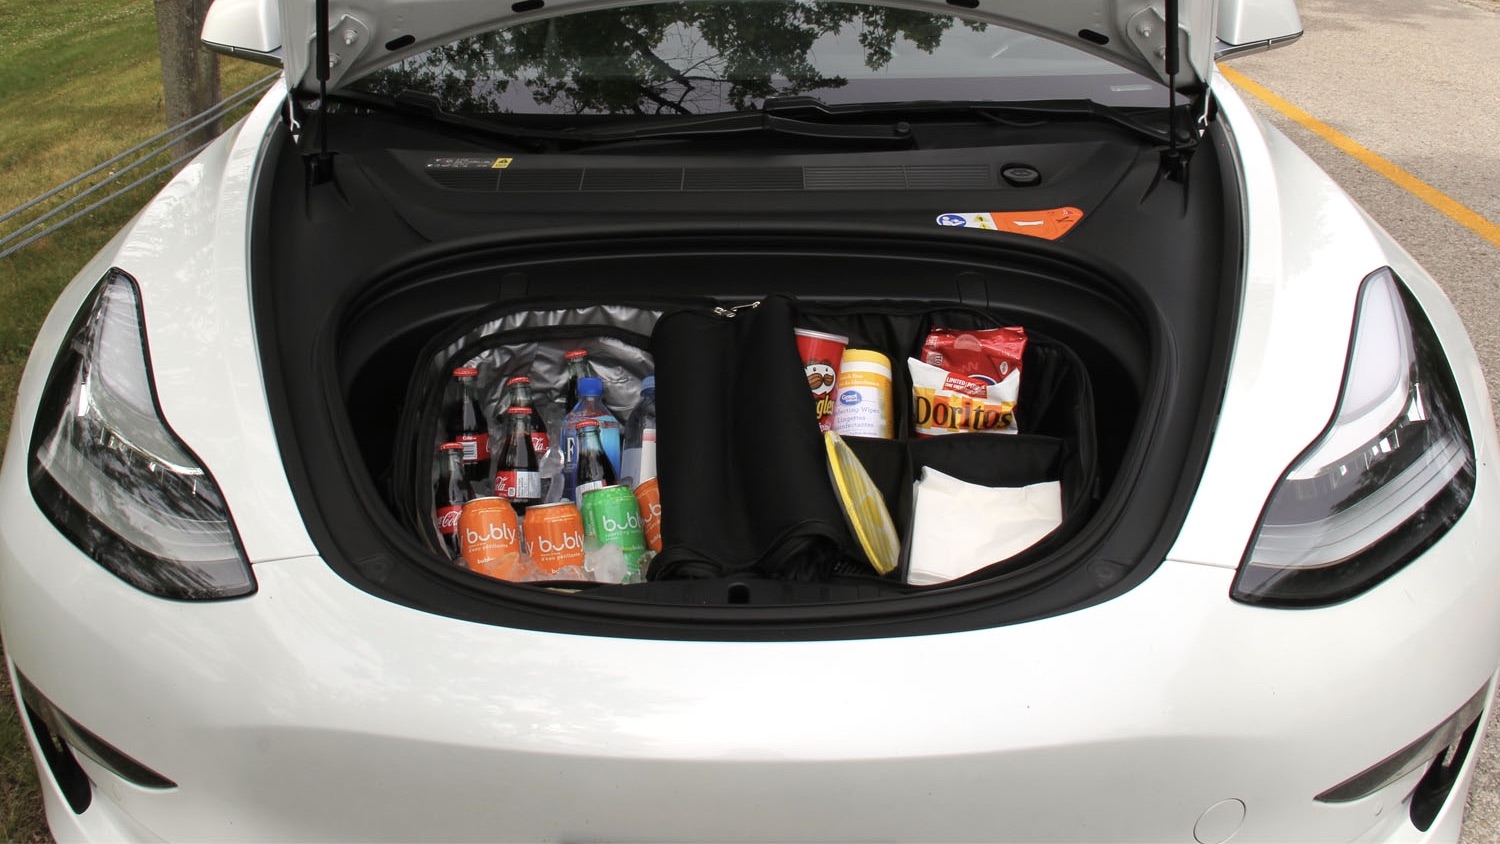 Tesloid's new Model 3 Frunk Cooler Food Bag is the perfect road